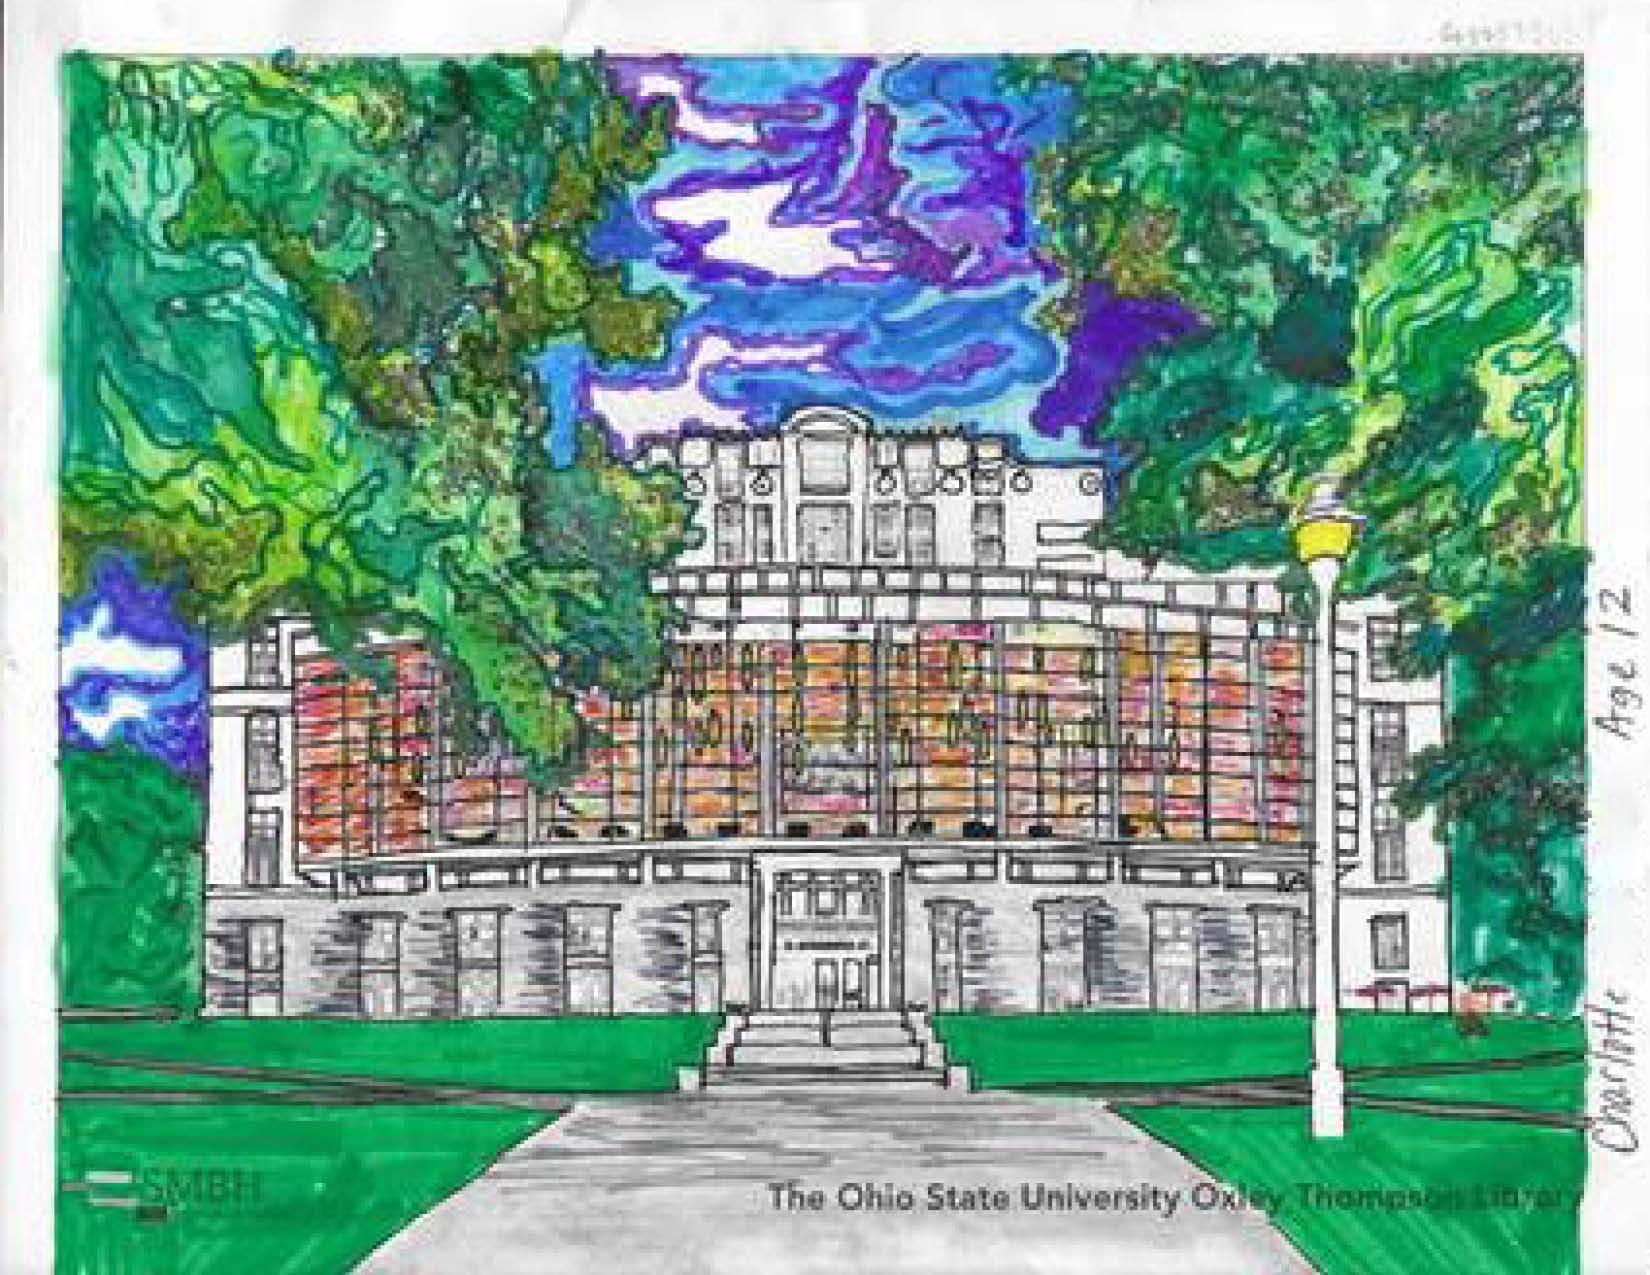 Colored page of the OSU Oxley Thompson Library in Columbus, Ohio. Done by Charlotte(11-15 Winner)